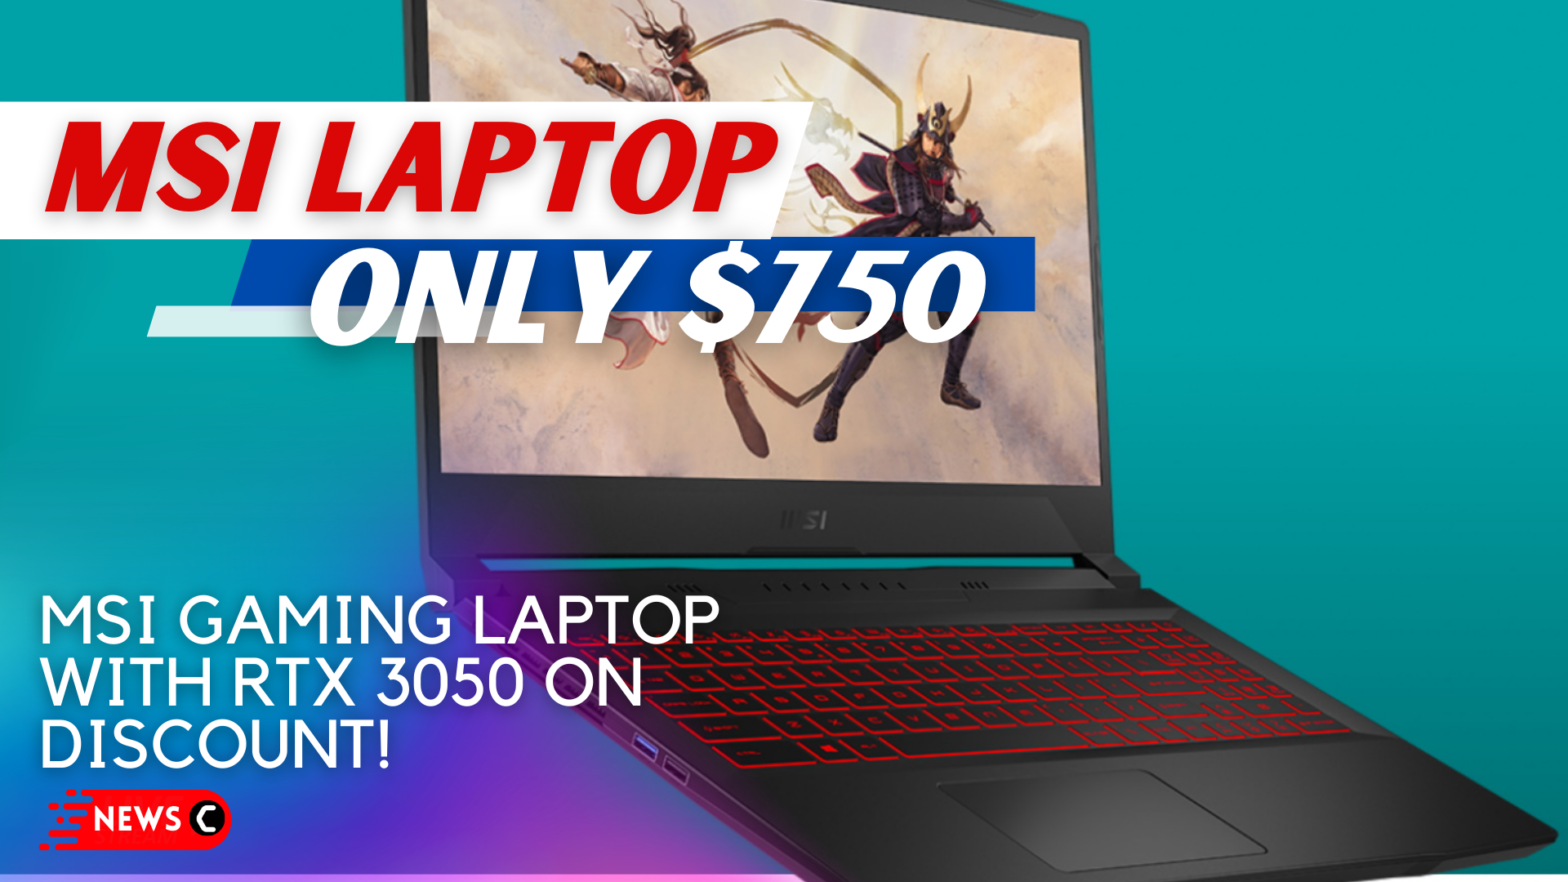 This MSI Gaming Laptop With RTX 3050 Is Only $750 Right Now!